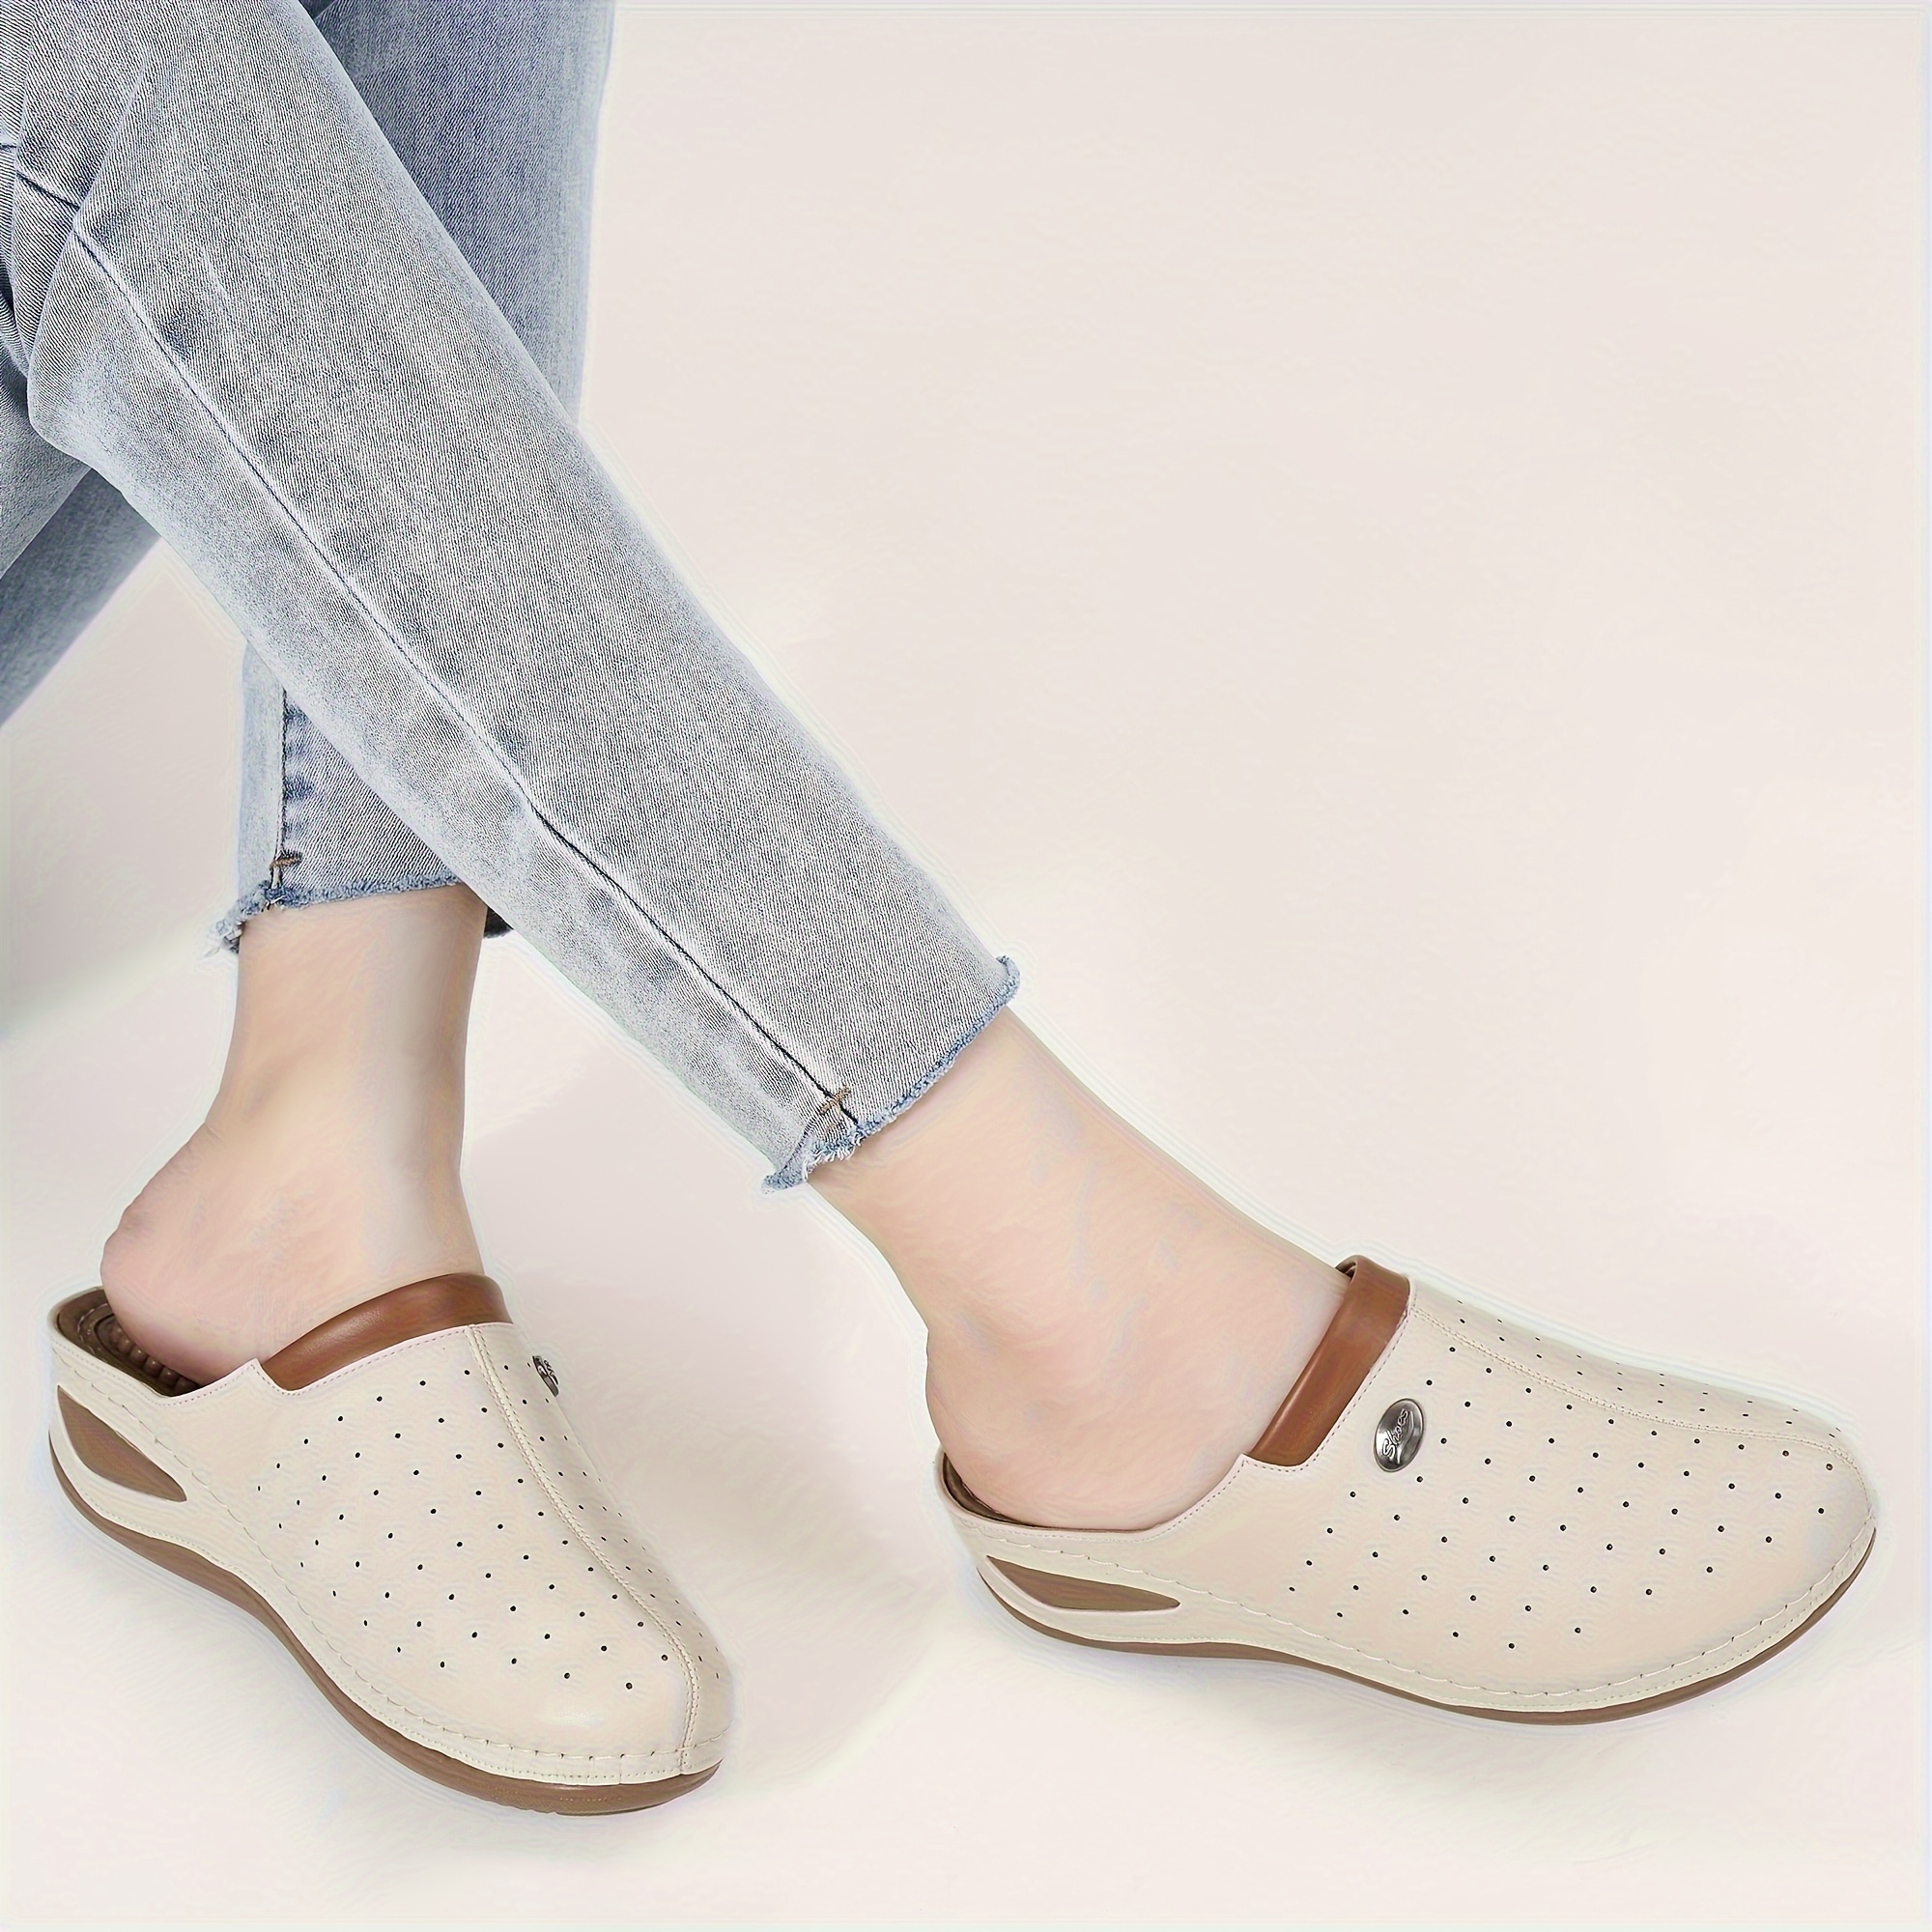 womens perforated wedge mules comfortable solid color slip on slide sandals casual outdoor slide shoes details 4